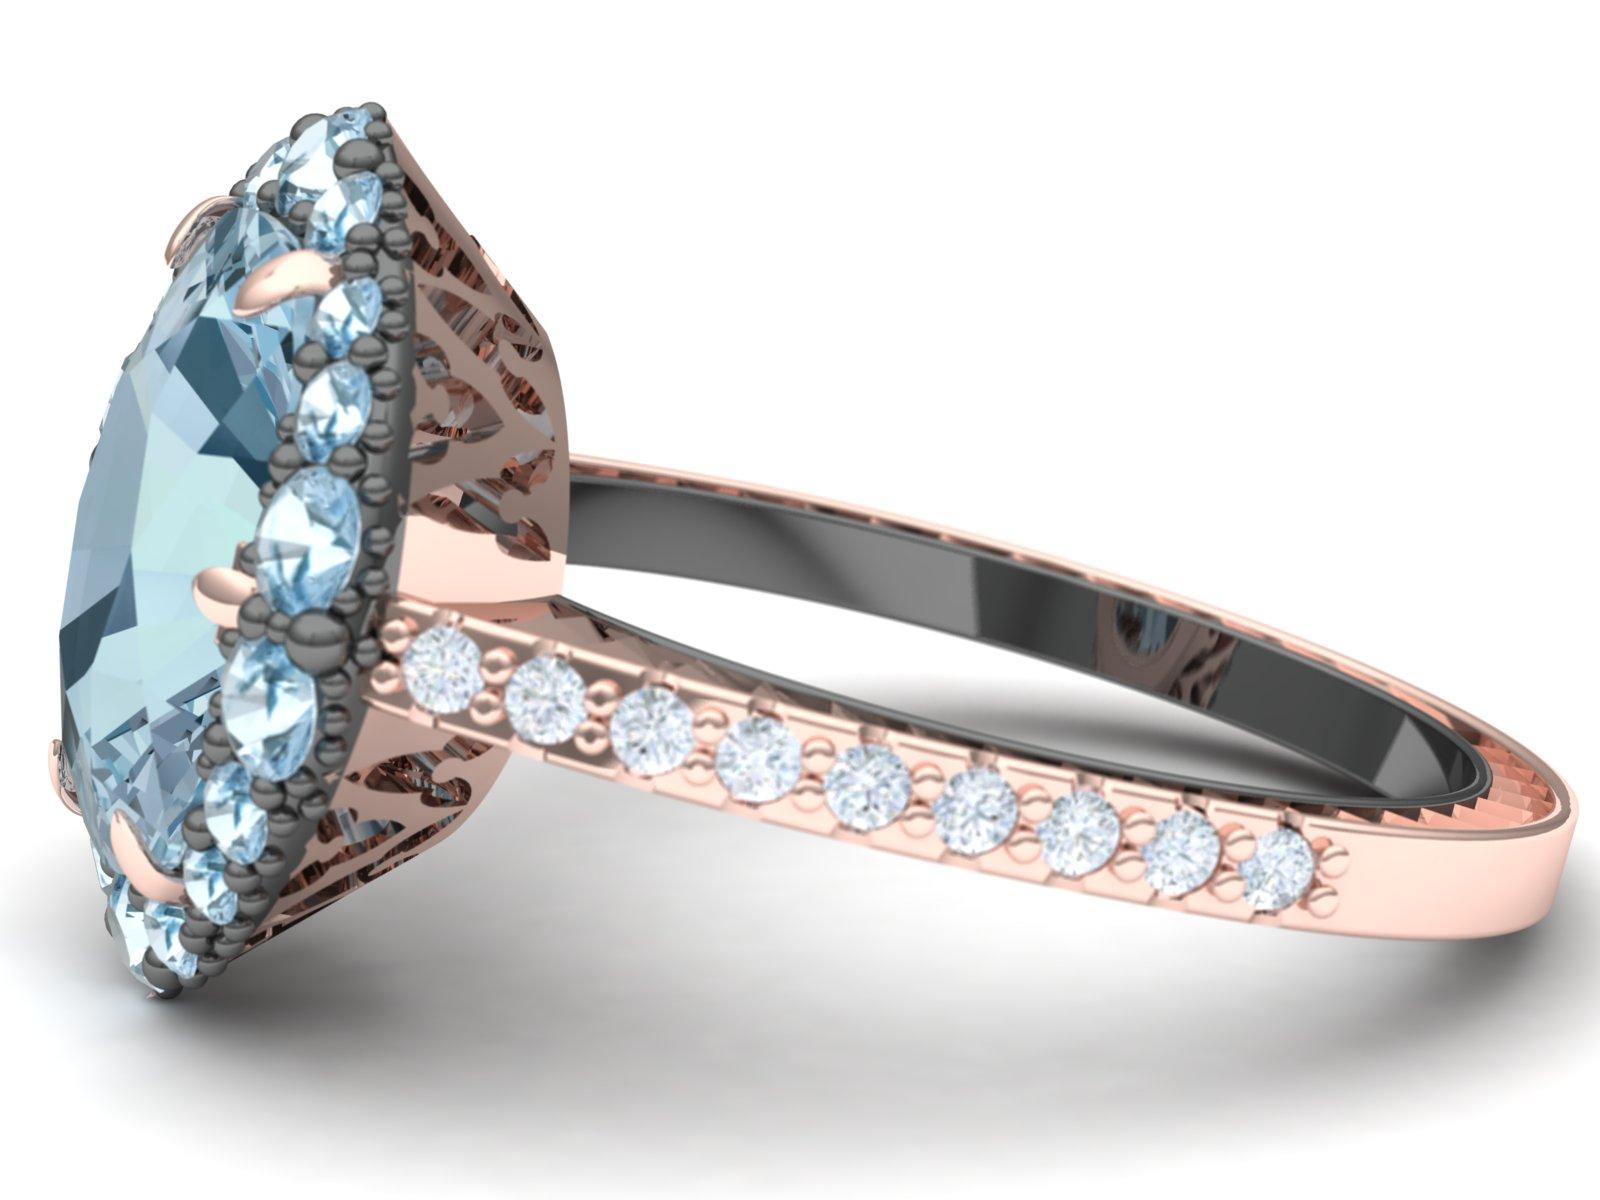 This modern and sleek Aquamarine and diamond ring has a 3.25 carat cushion cut center.  The head is constructed of a 18 k rose gold six talon prongs.  The top of the ring has a mixture of Aqumarine and diamond pave'd in grayed silver.  The shank of